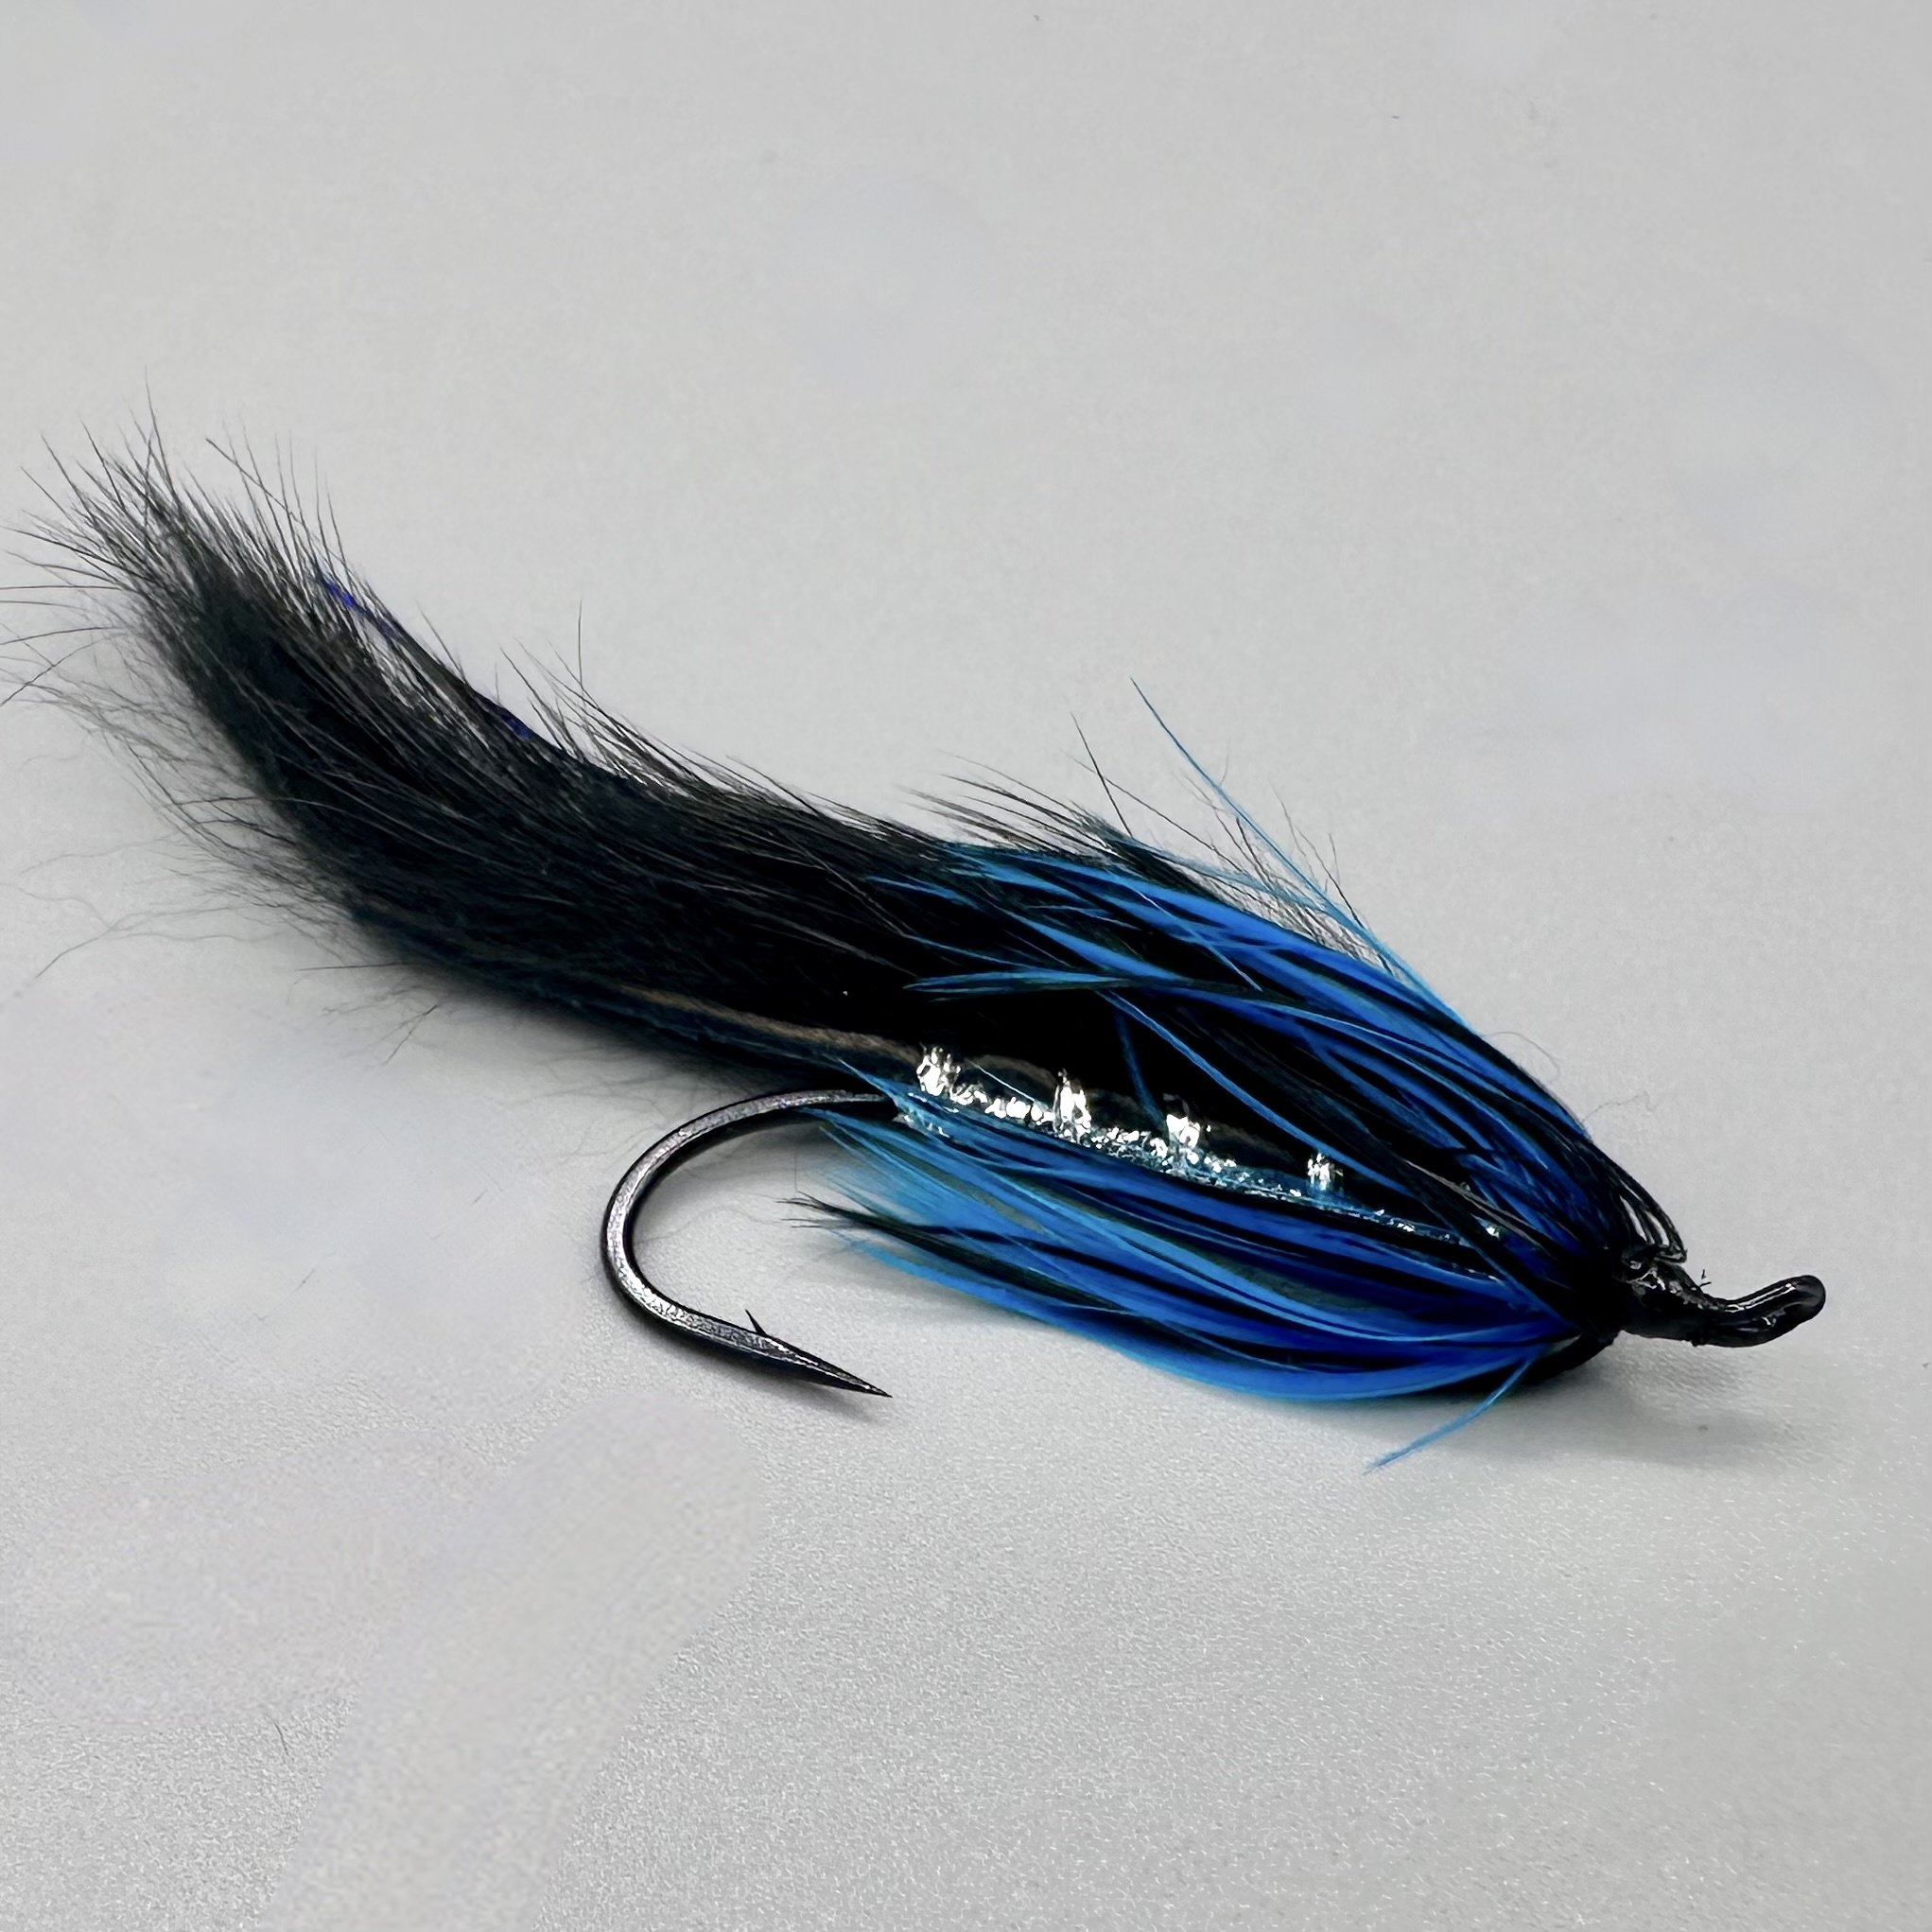 Blog - Top 5 Great Lakes Steelhead Flies - Drift Outfitters & Fly